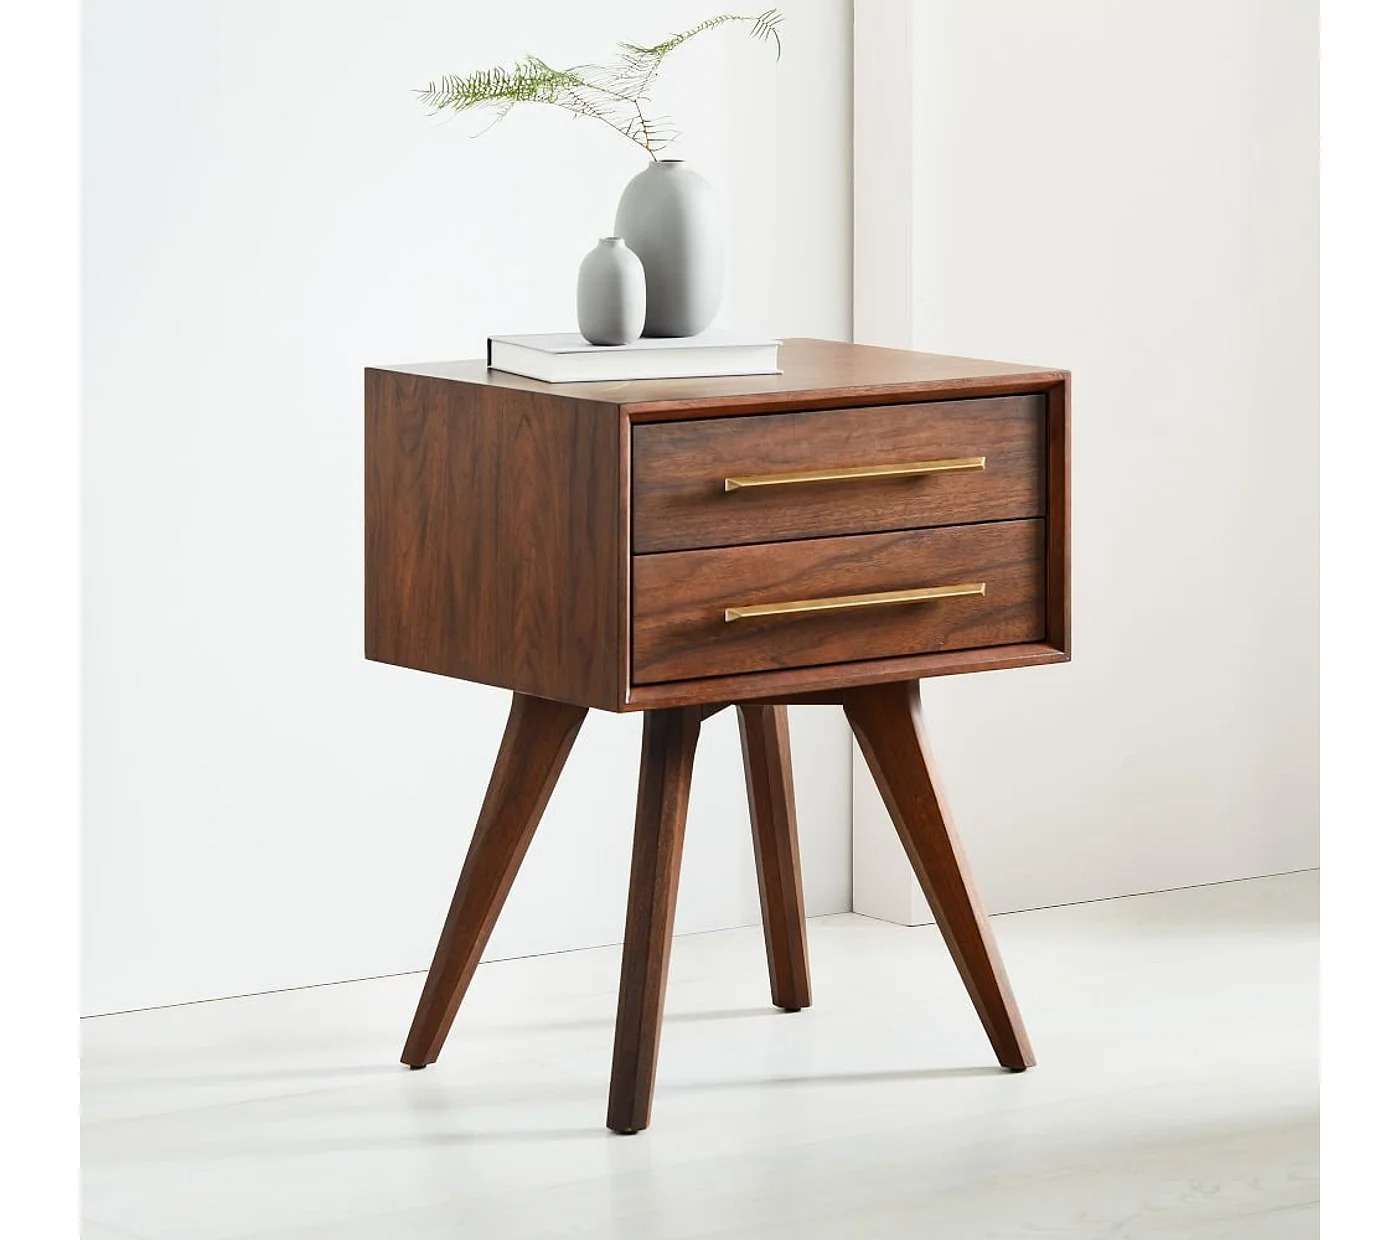 MAJAS – PRIMO SIDE TABLE